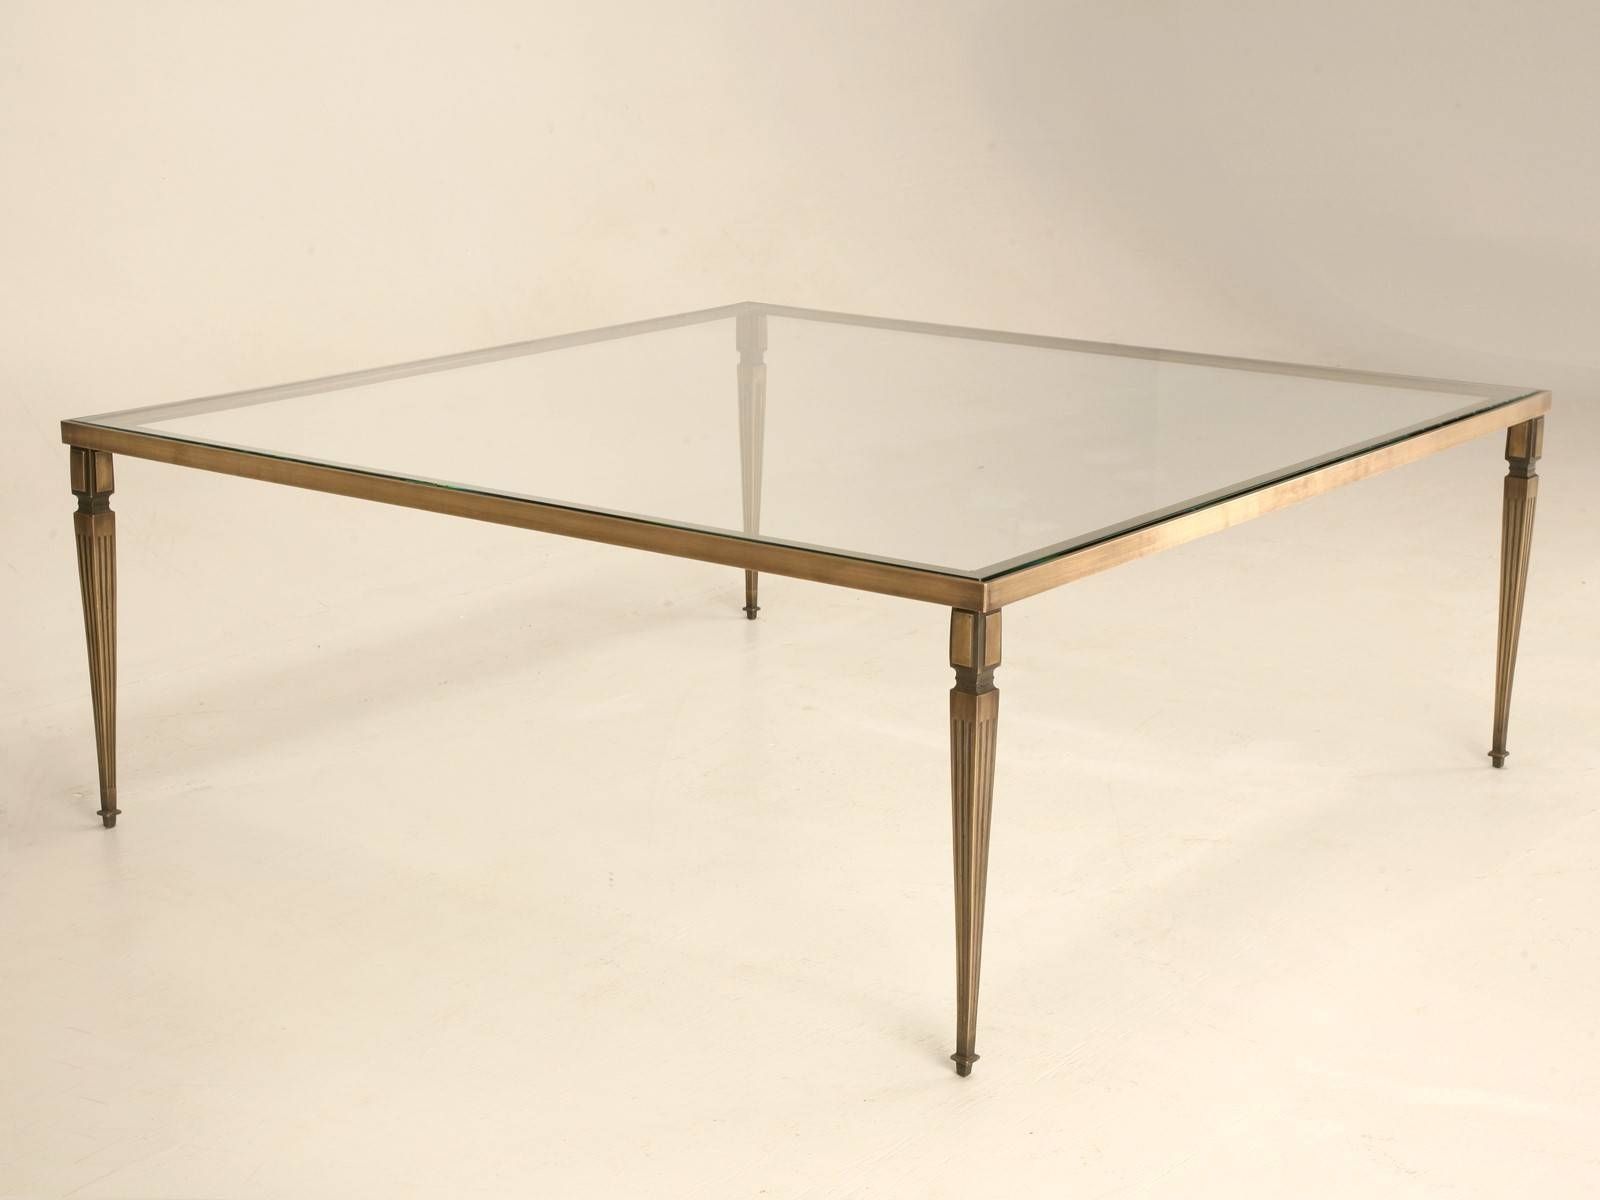 Coffee Table: Charming Bronze Coffee Table Designs Antique Bronze With Bronze Coffee Table Glass Top (View 3 of 30)